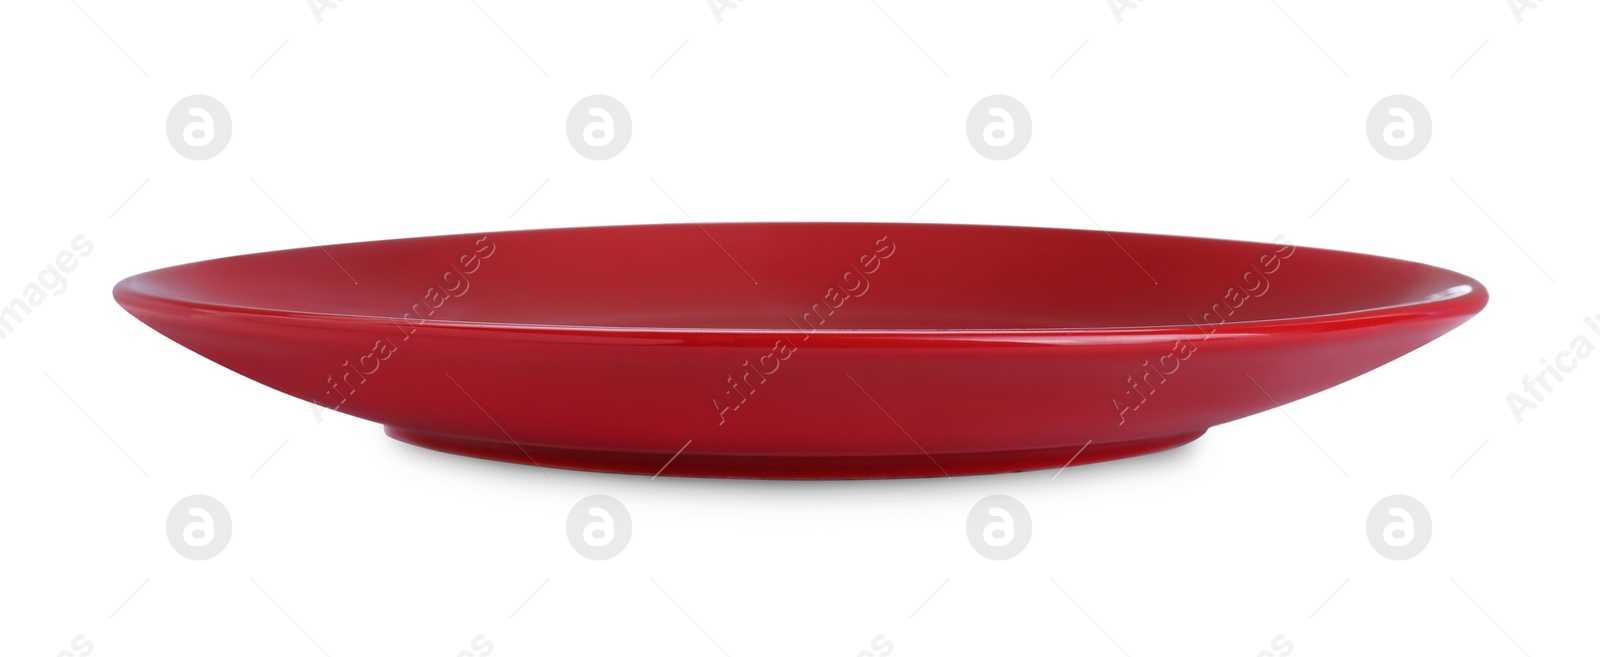 Photo of Empty red ceramic plate isolated on white